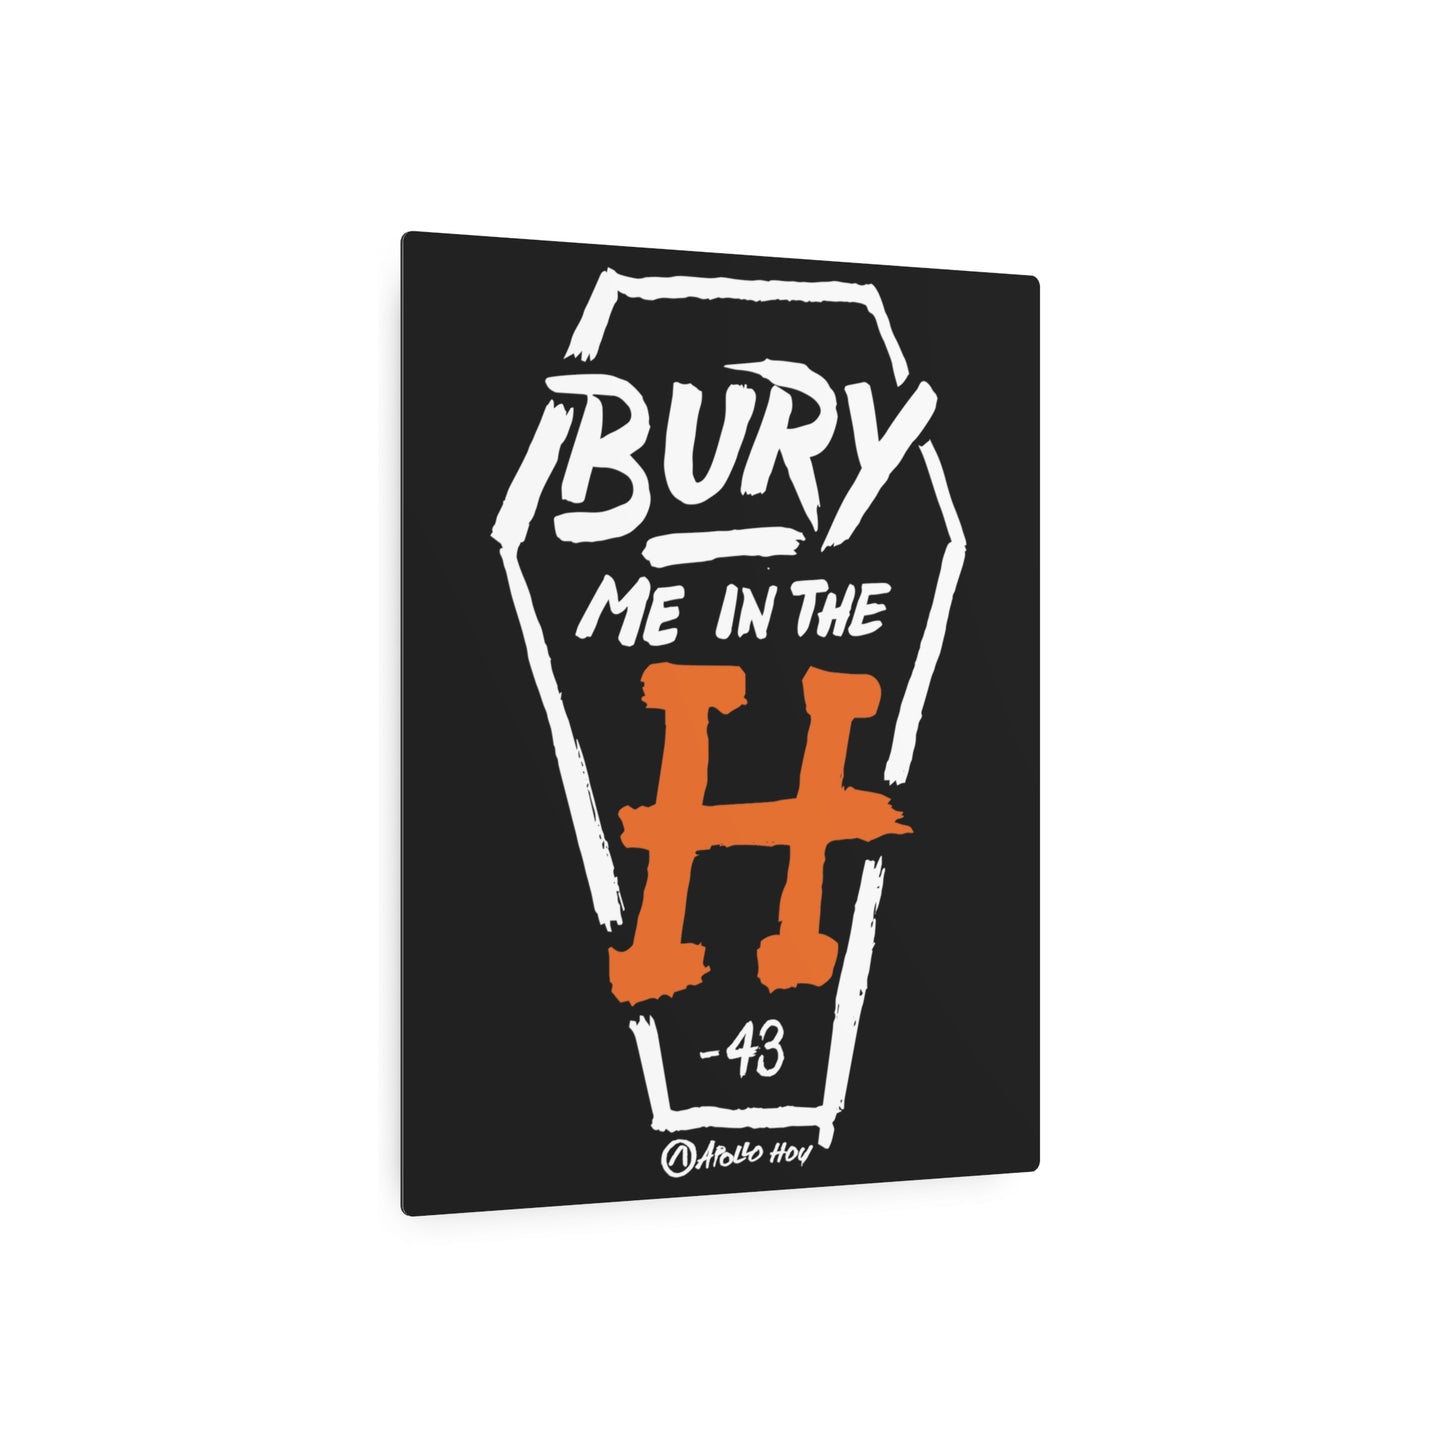 Bury Me In The H (Coffin) Metal Art Sign